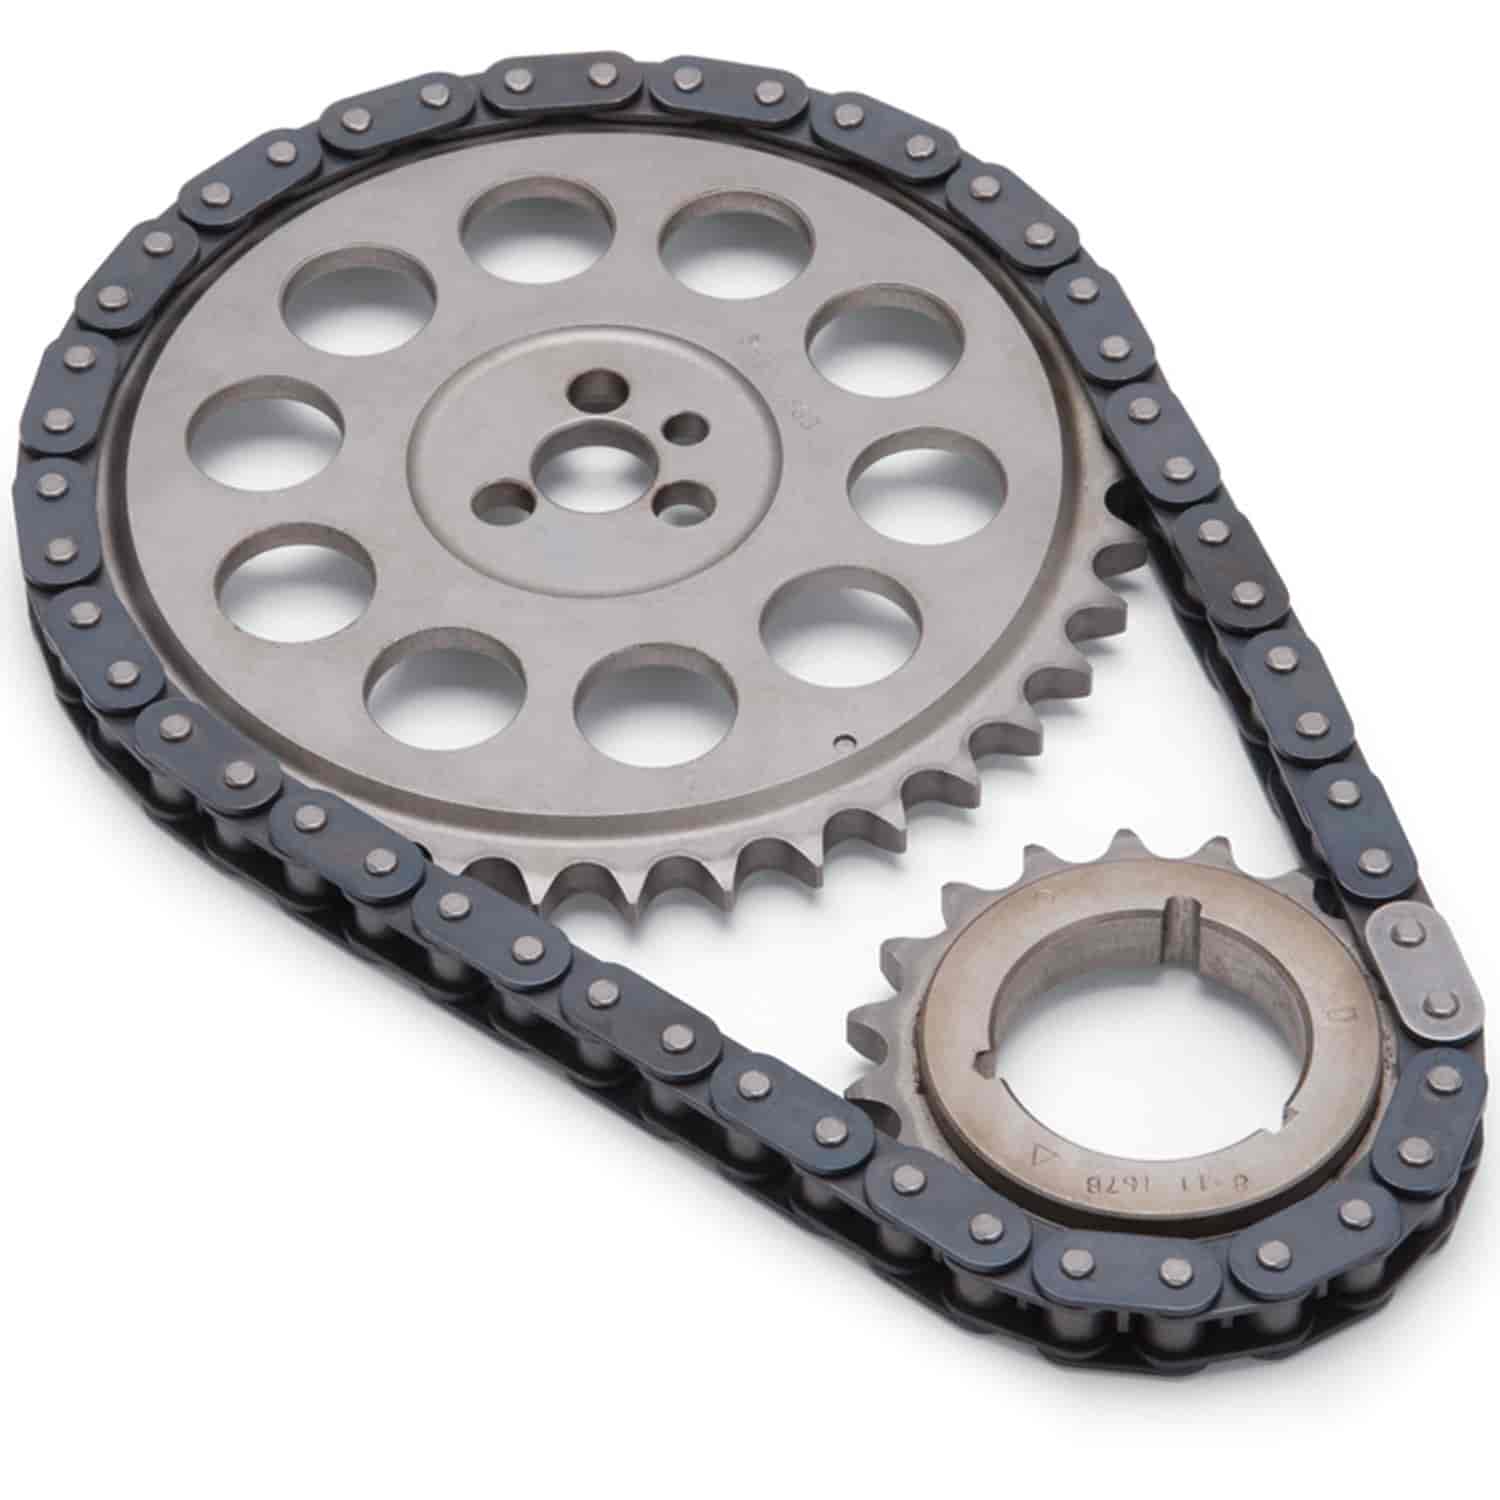 Performer-Link Timing Chain Set for 1996-Later Big Block Chevy Gen VI 454/502 V8